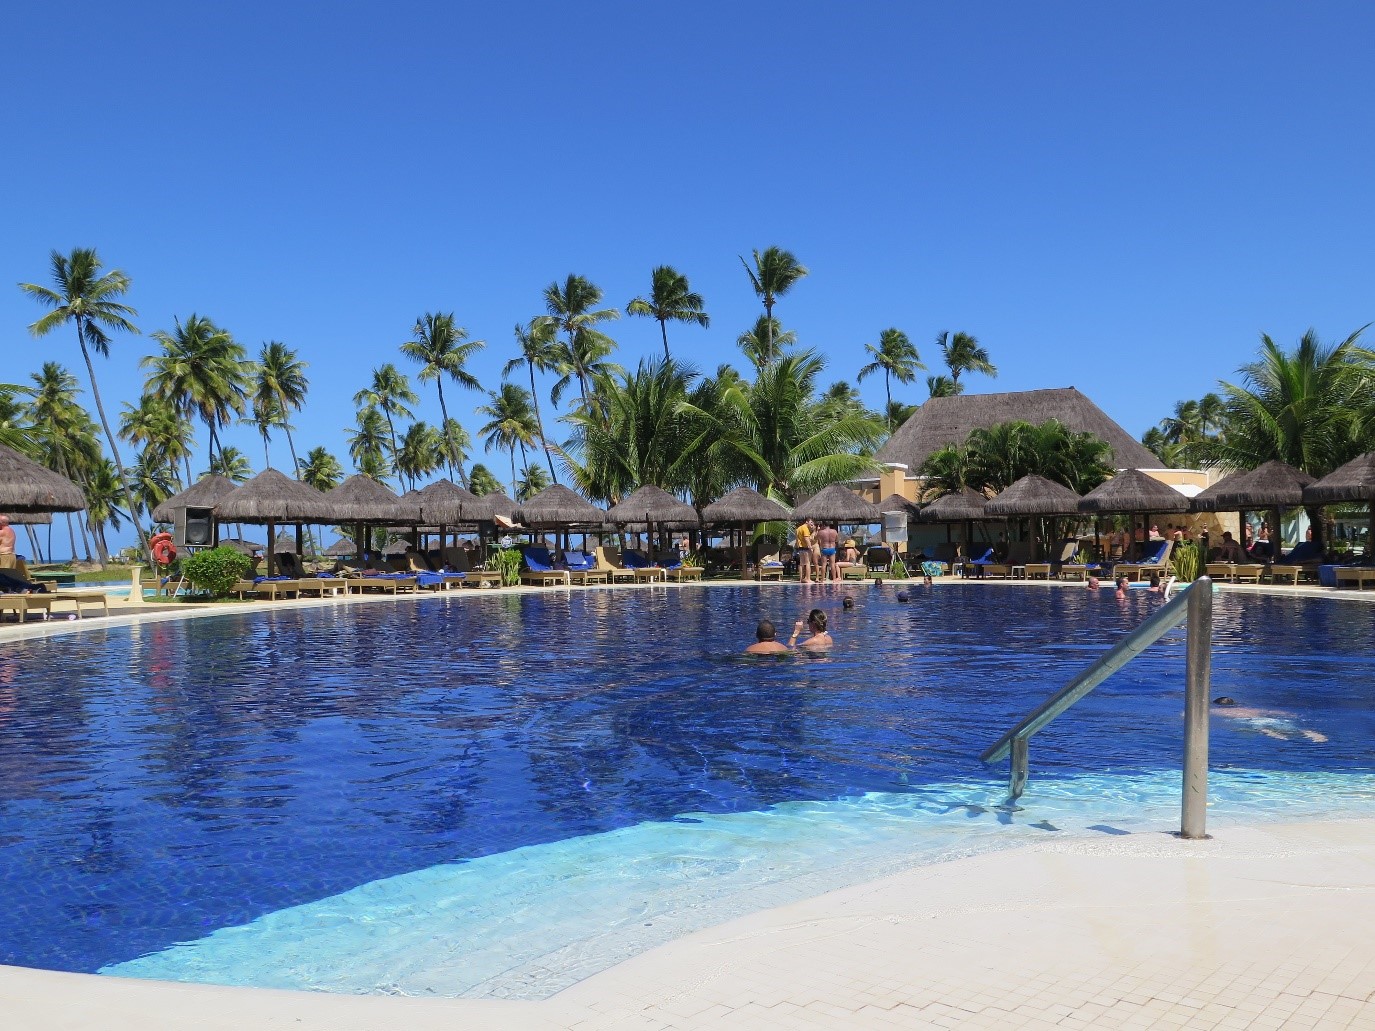 Main pool, the palm trees in the background mark the limit with the beach